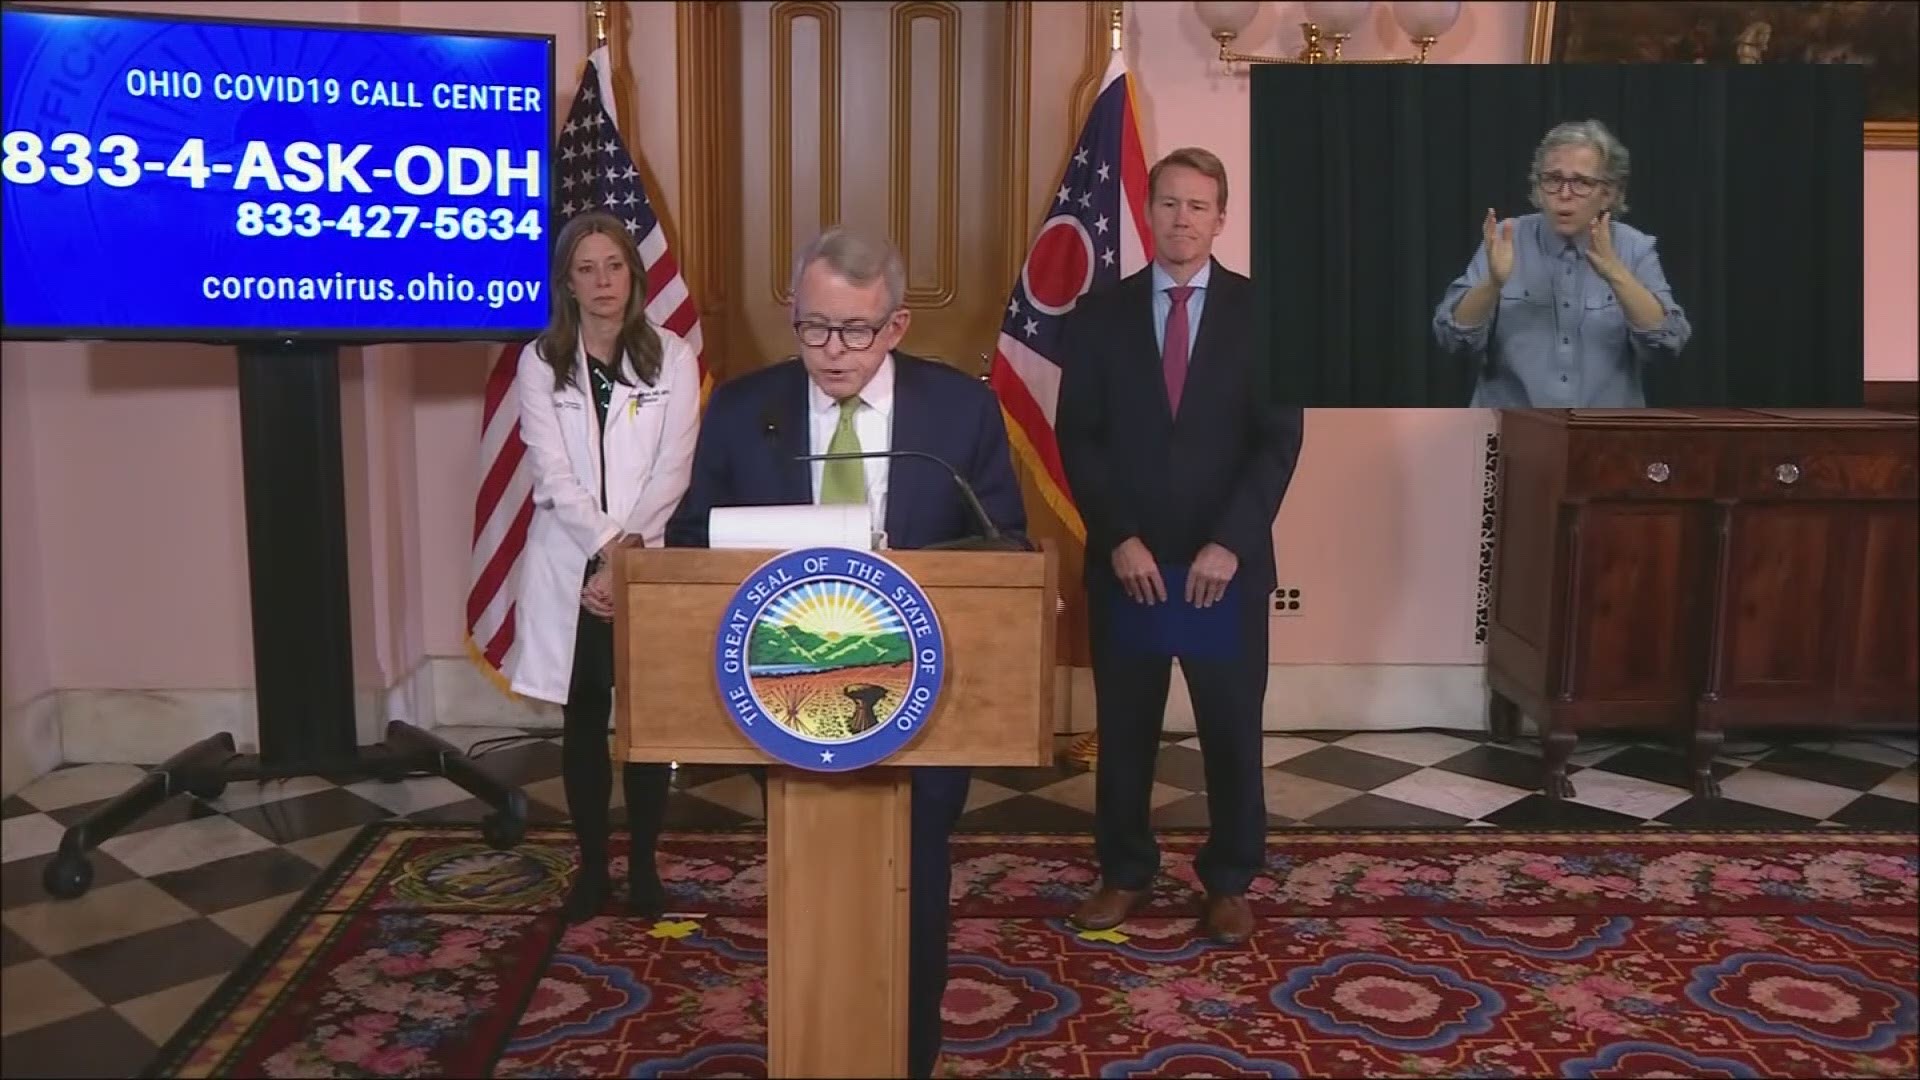 "The sun will shine again. It will be Spring again, in this wonderful and beautiful state of Ohio."